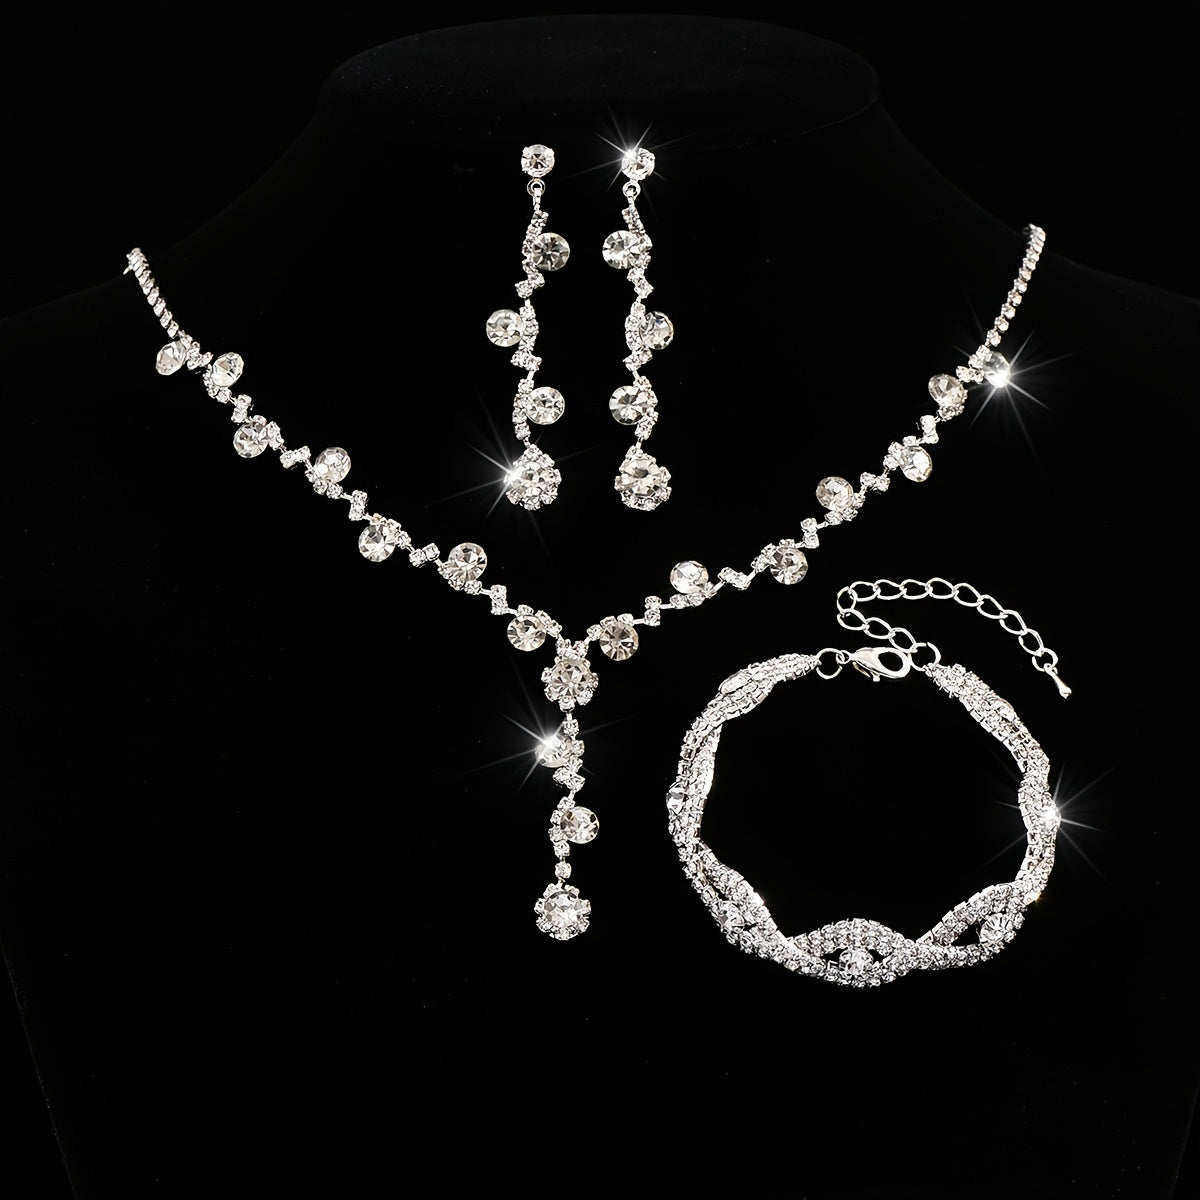 Elegant Rhinestone Flower Jewelry Set with Shiny Zircon Pendant Necklace and Chain Bracelet for Weddings and Special Occasions